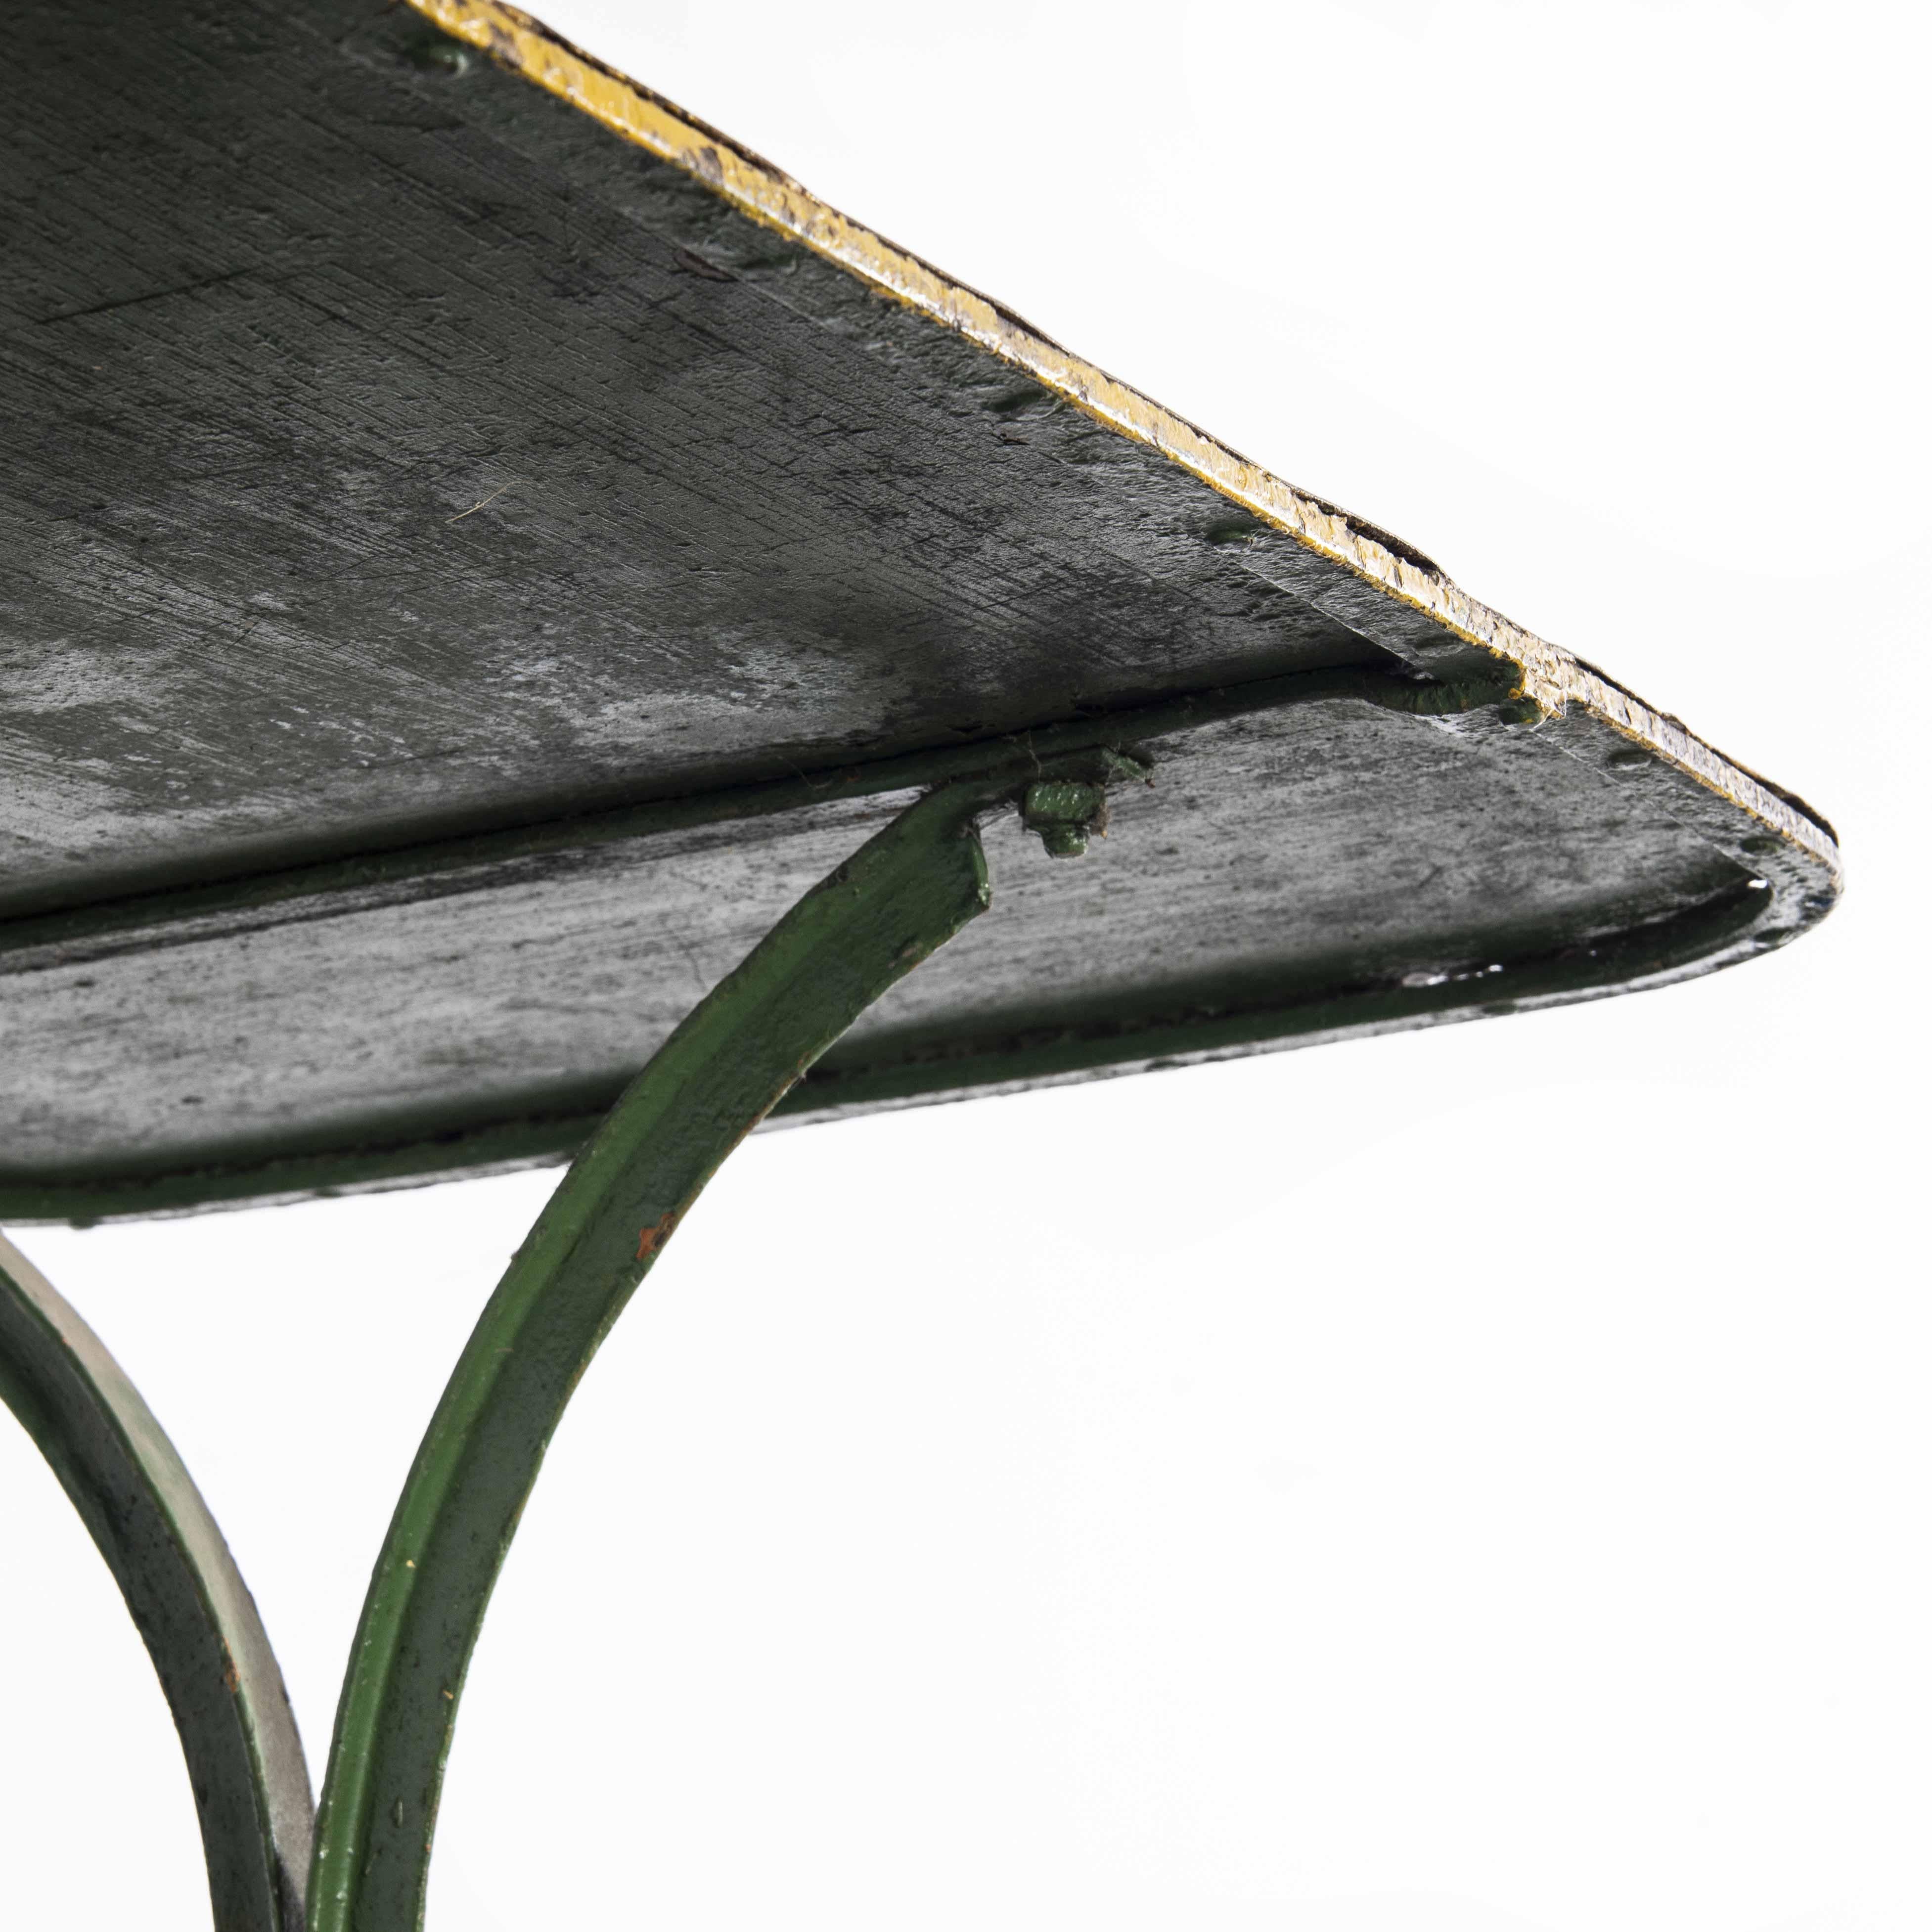 1950’S French Rectangular Forged Metal Dining Table
1950’S French Rectangular Forged Metal Dining Table. Good honest French metal dining table with a hand forged elegant curved base and the original sheet metal top. We love the colour combination